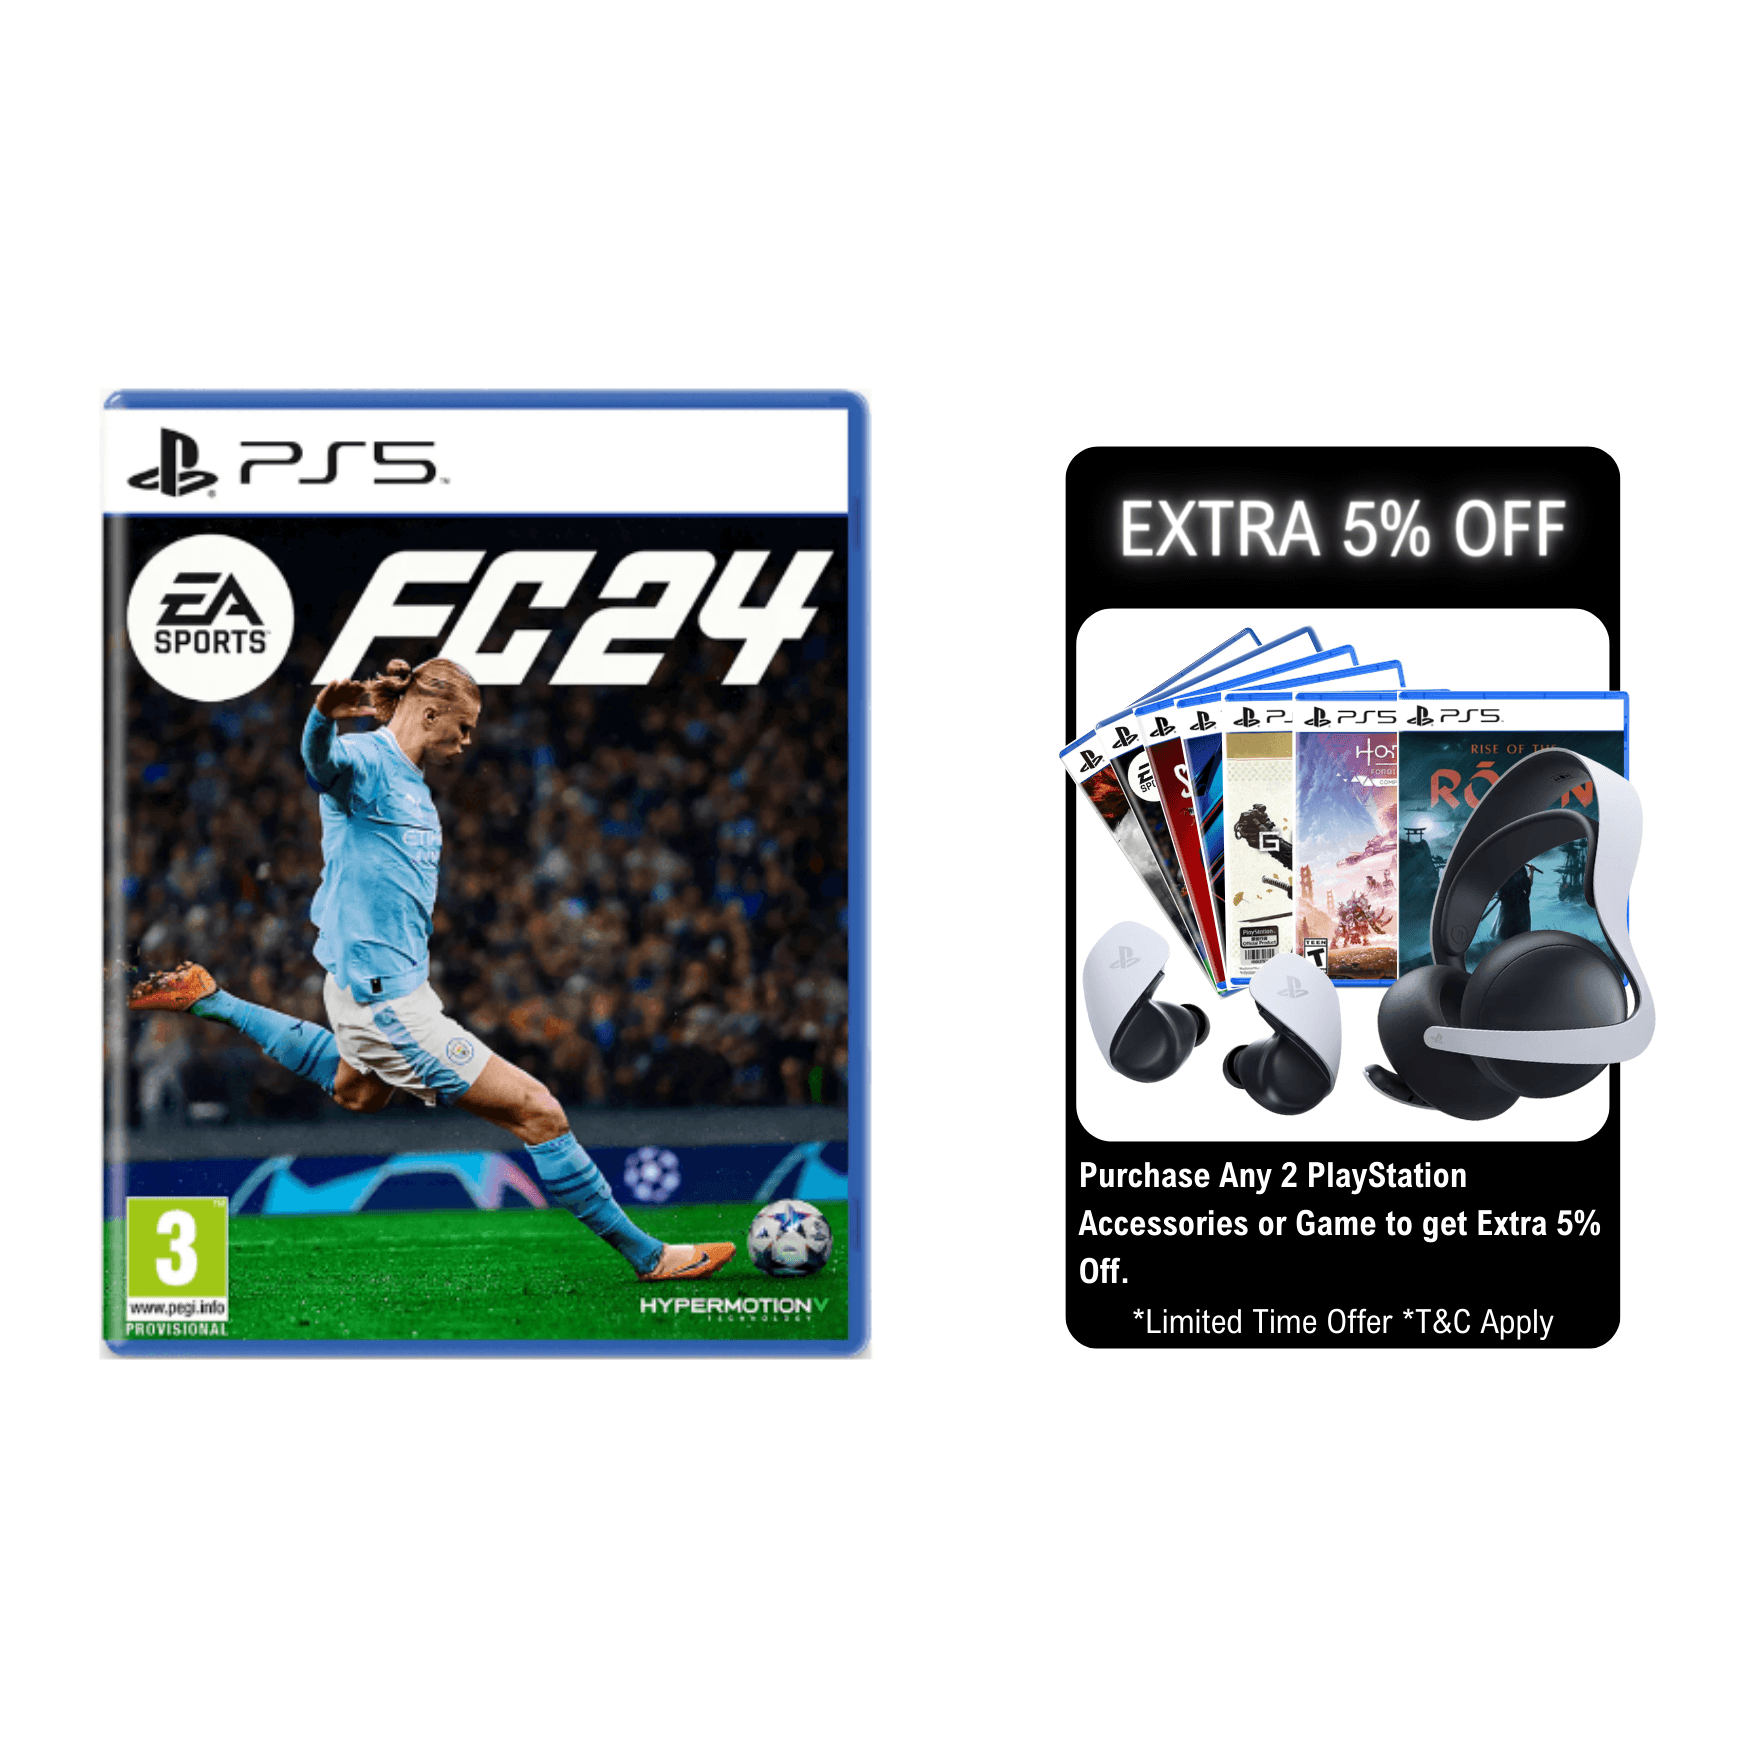 Sony PS5 Game EA Sport FC24 [PS5 ANY 2 5% OFF]